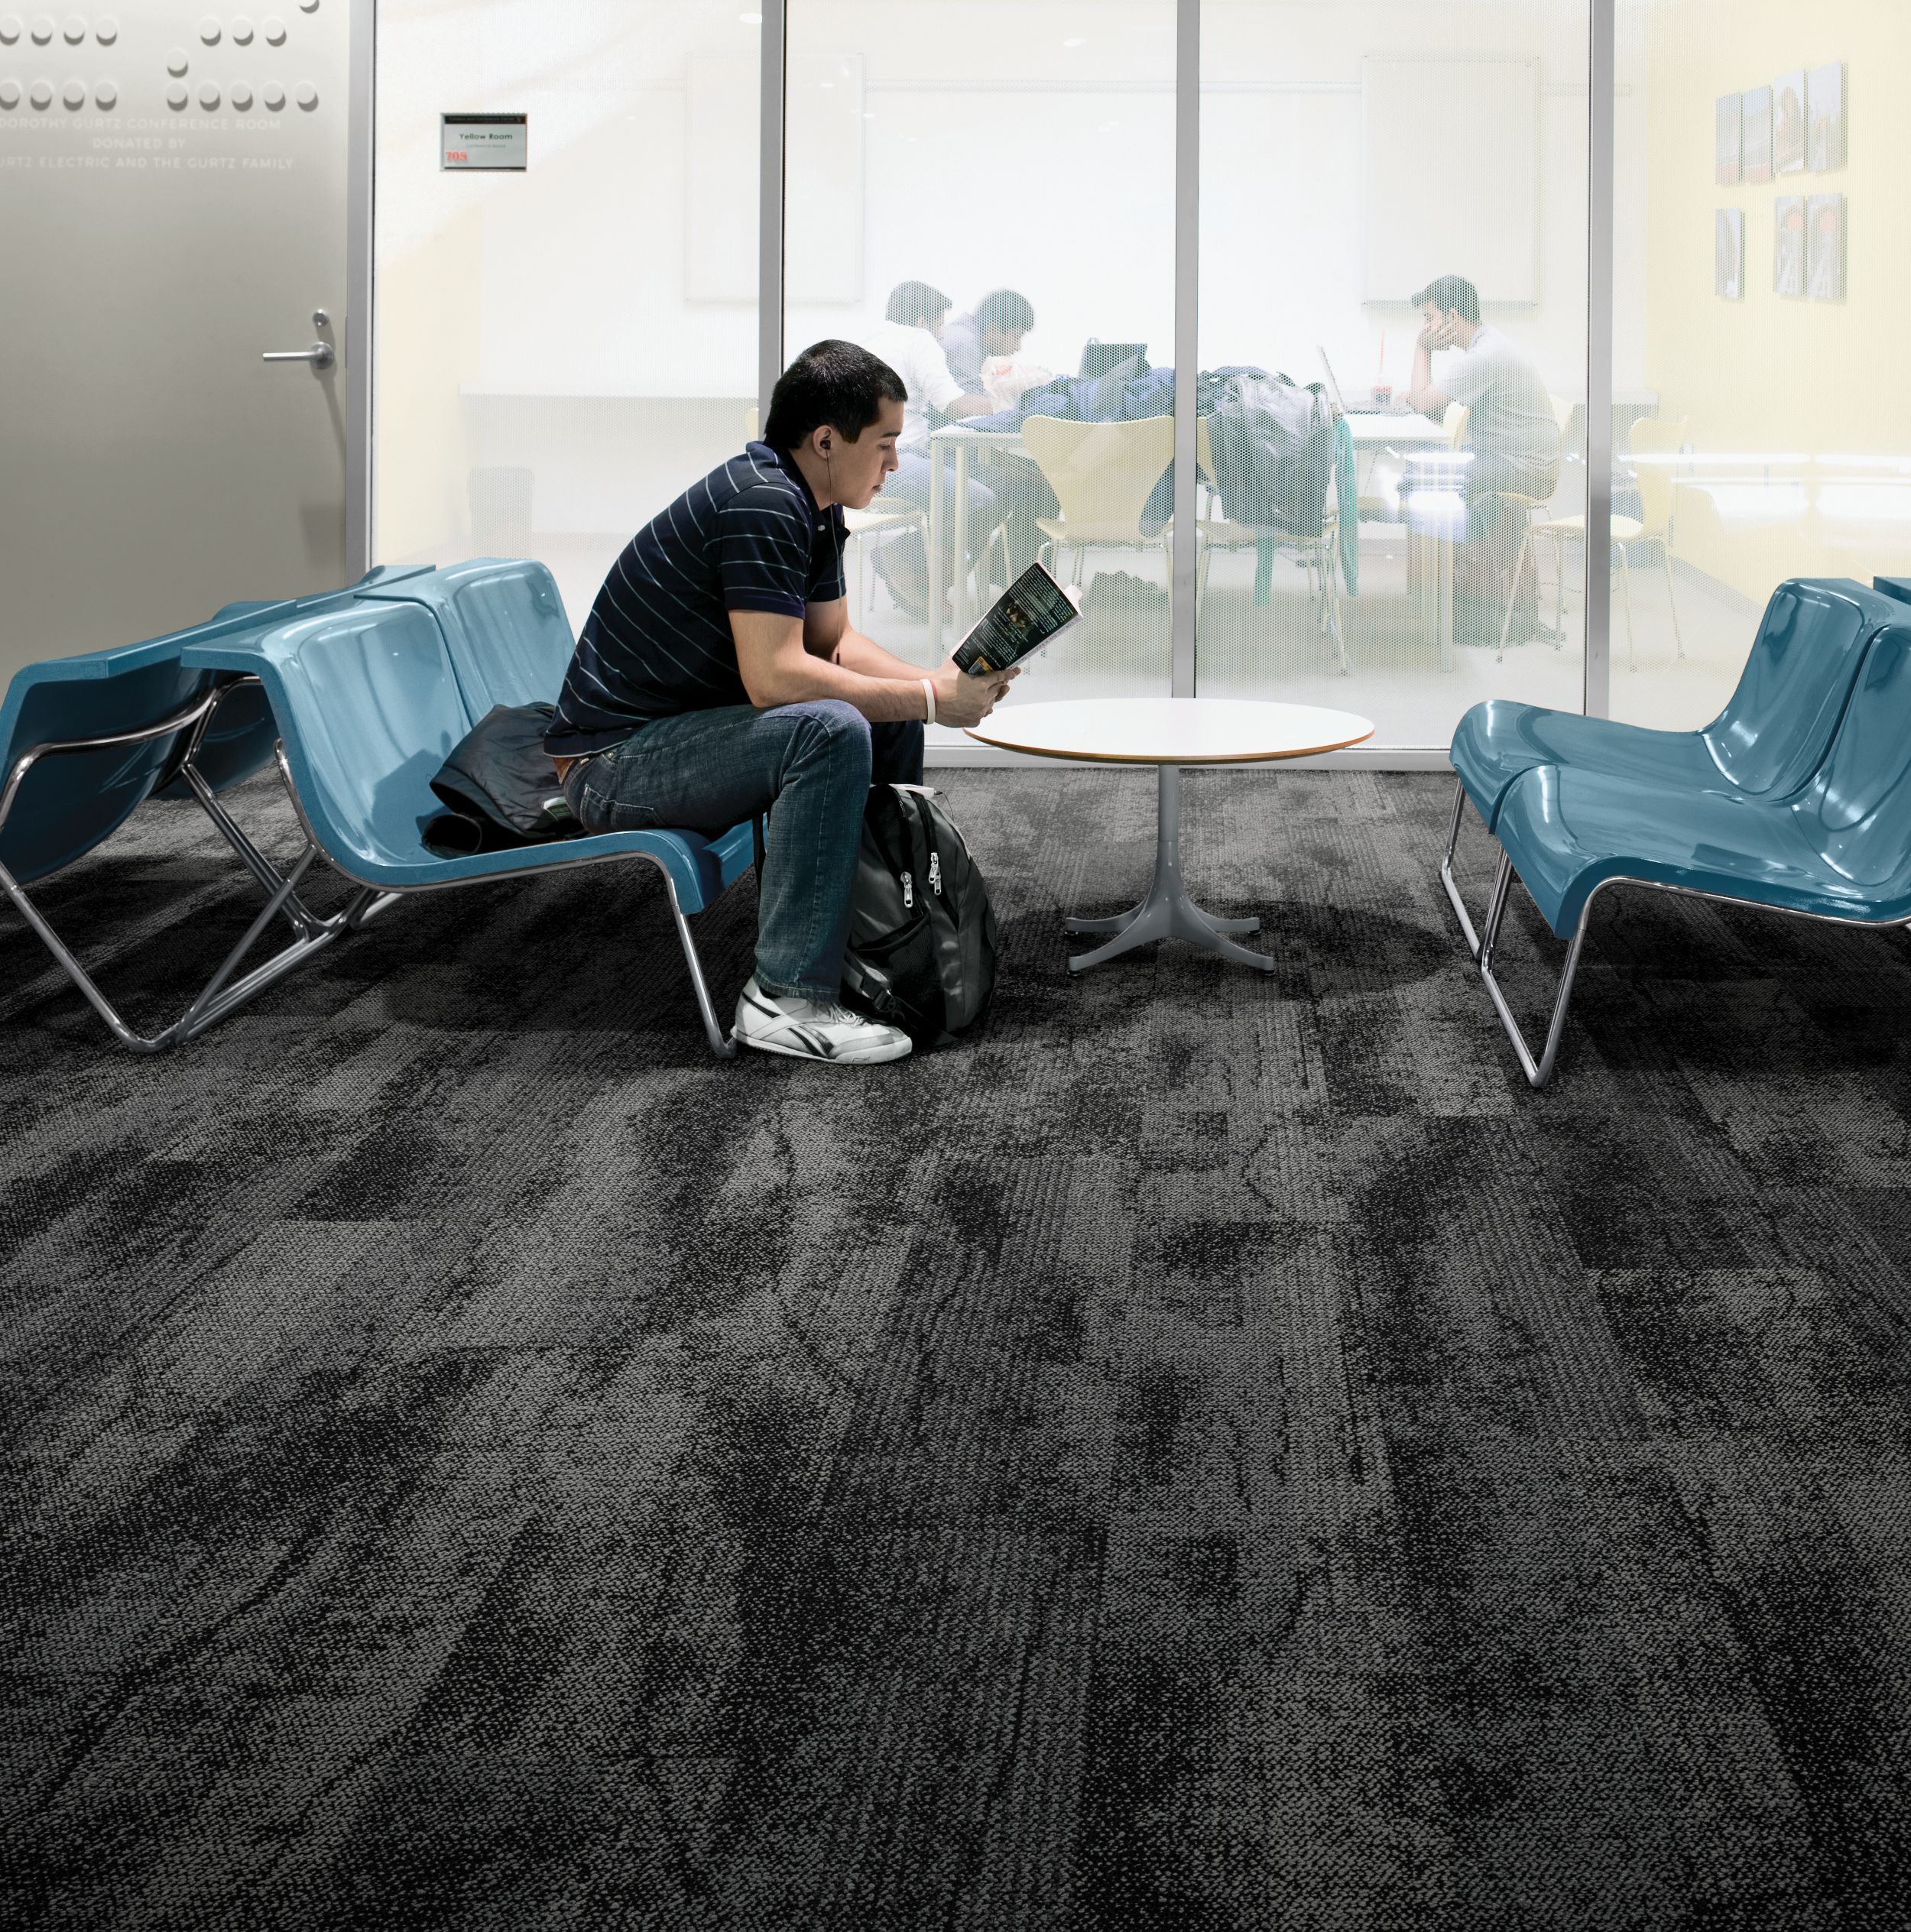 Interface Neighborhood Smooth plank carpet tile in public education space with man reading a book on blue chair image number 6